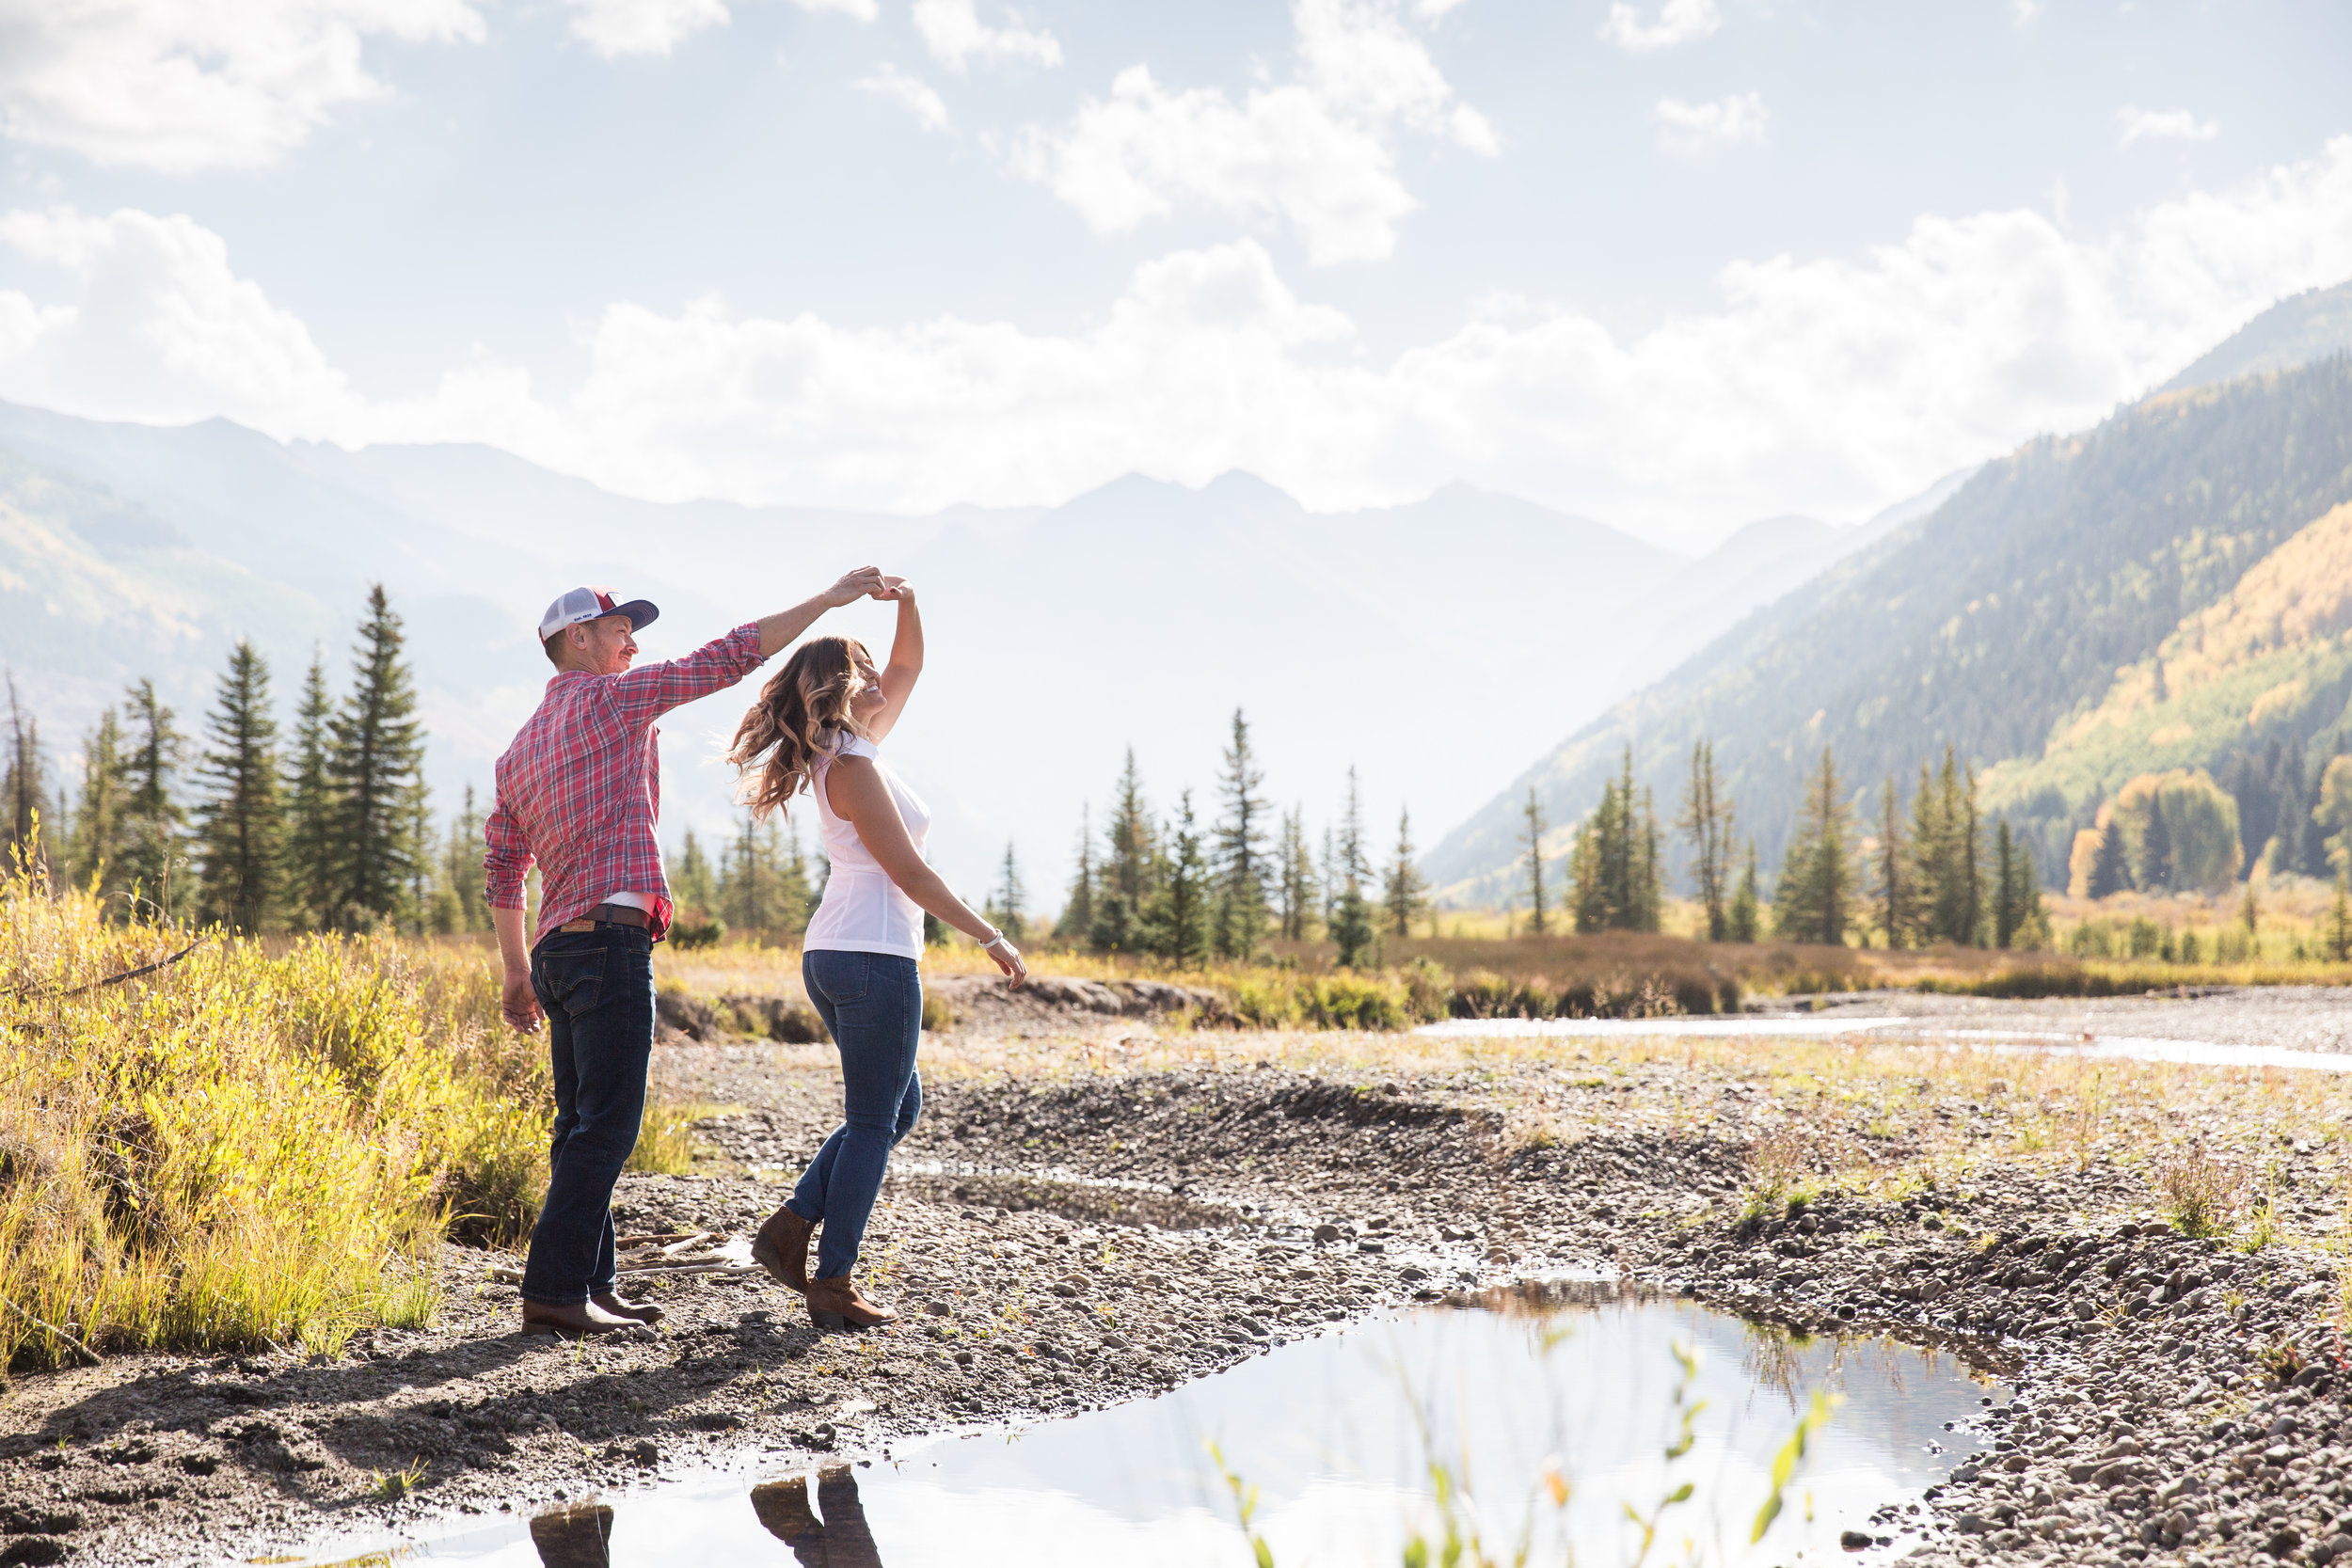 Telluride Engagement Photography - Telluride Proposal